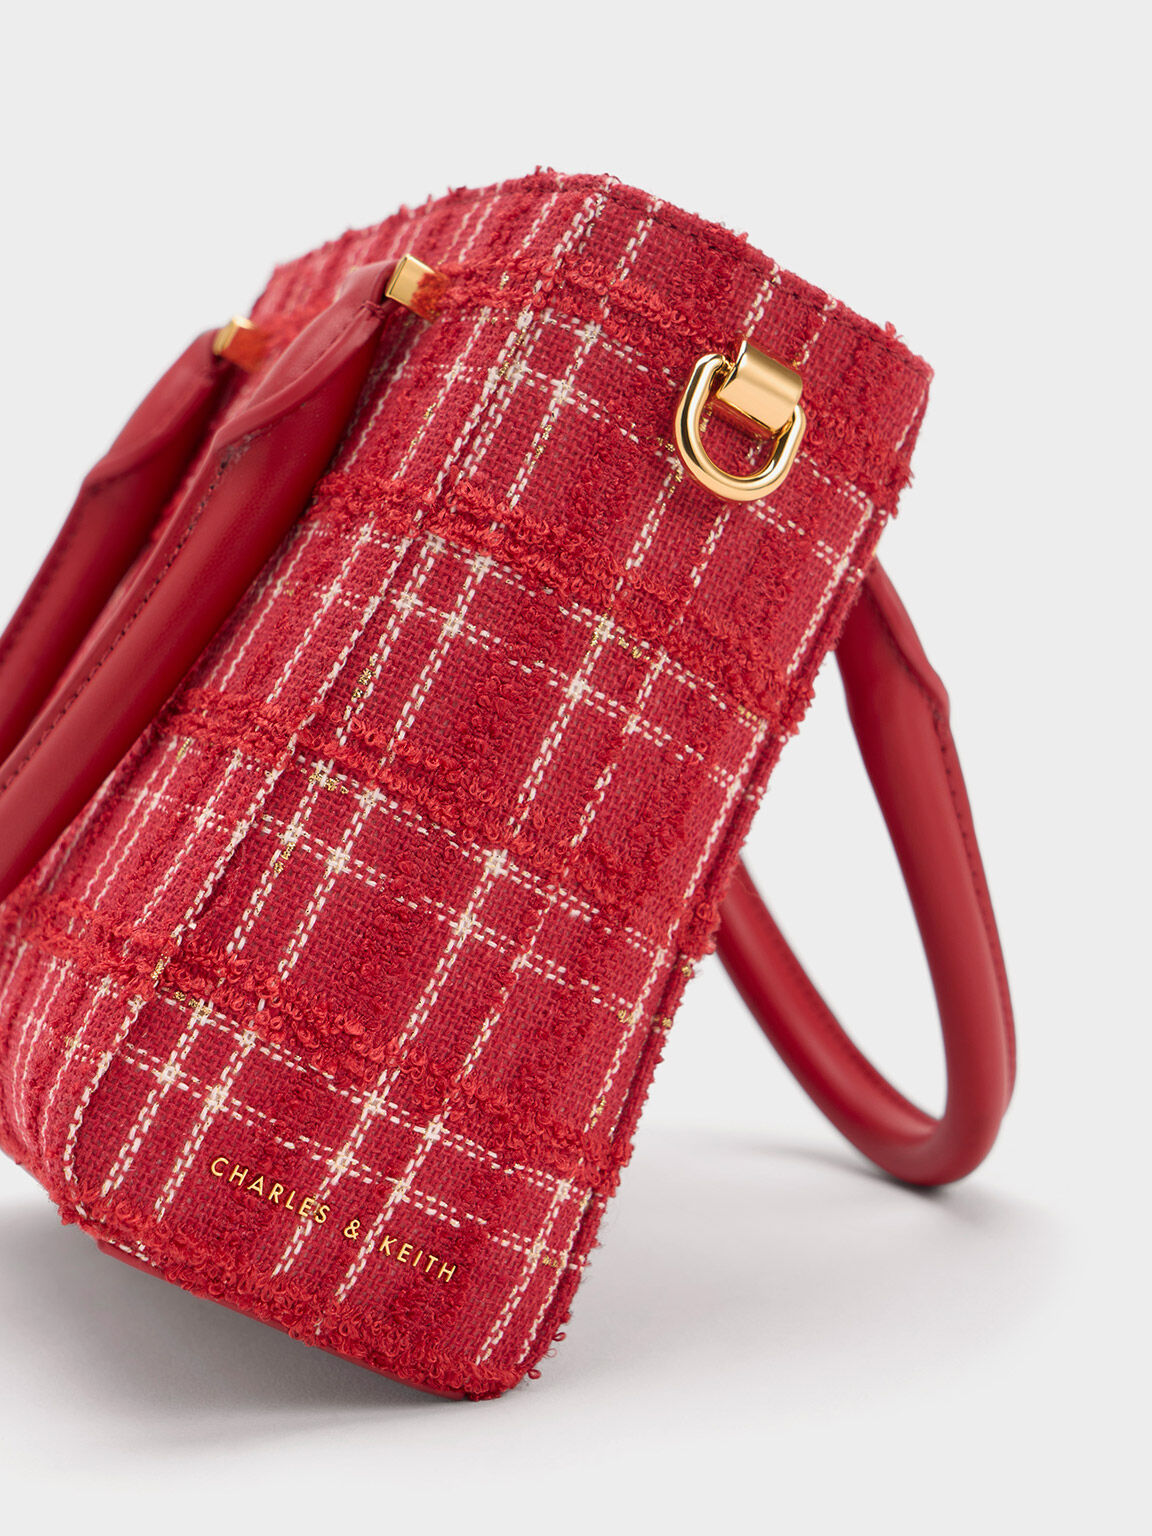 Buffalo Plaid Faux Leather Crossbody Bag, Small Vegan Handbag with  Adjustable Strap, Made in USA — The Vincent Creations